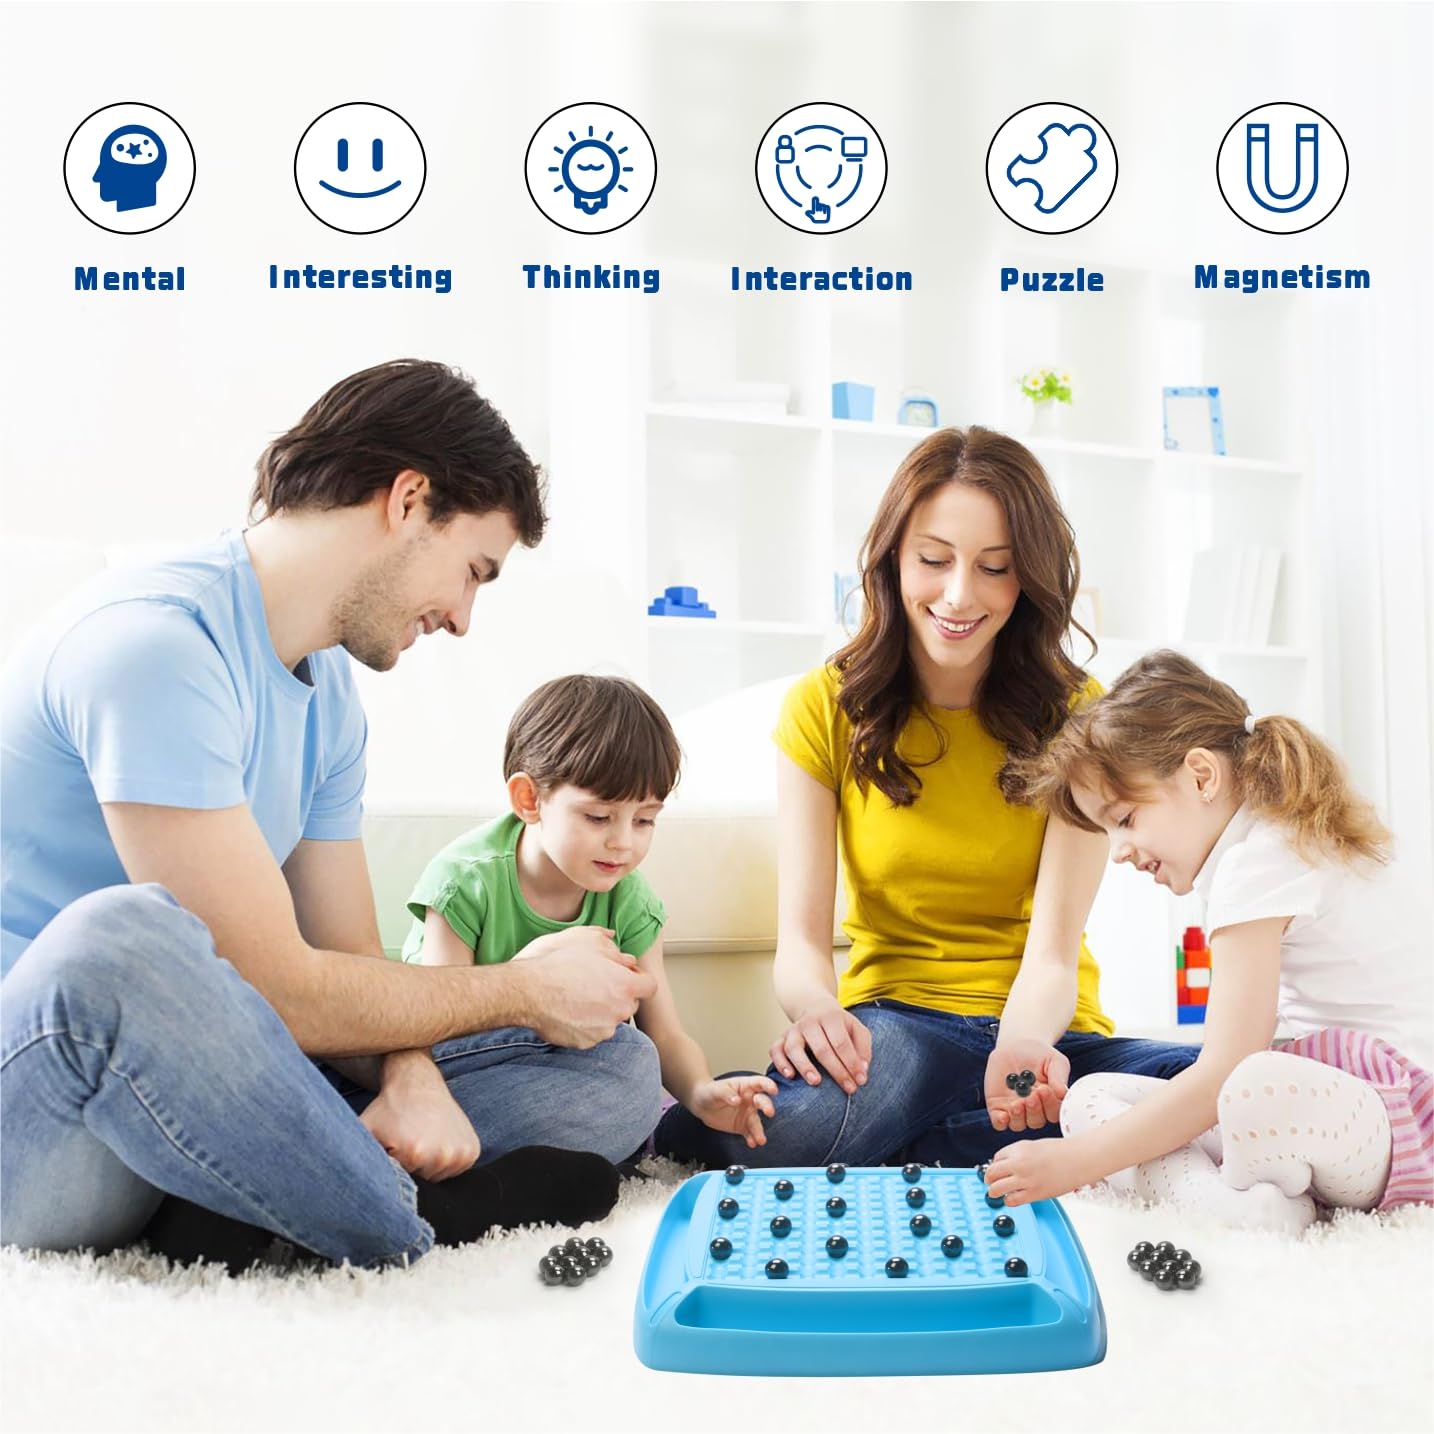 2024 New Magnetic Chess Game,Magnetic Chess Fun Family Games for Kids and Adults,Magnet Chess Game with 40Pcs Magnetic Stones,Table Top Magnetic Board Game,2-4 Players